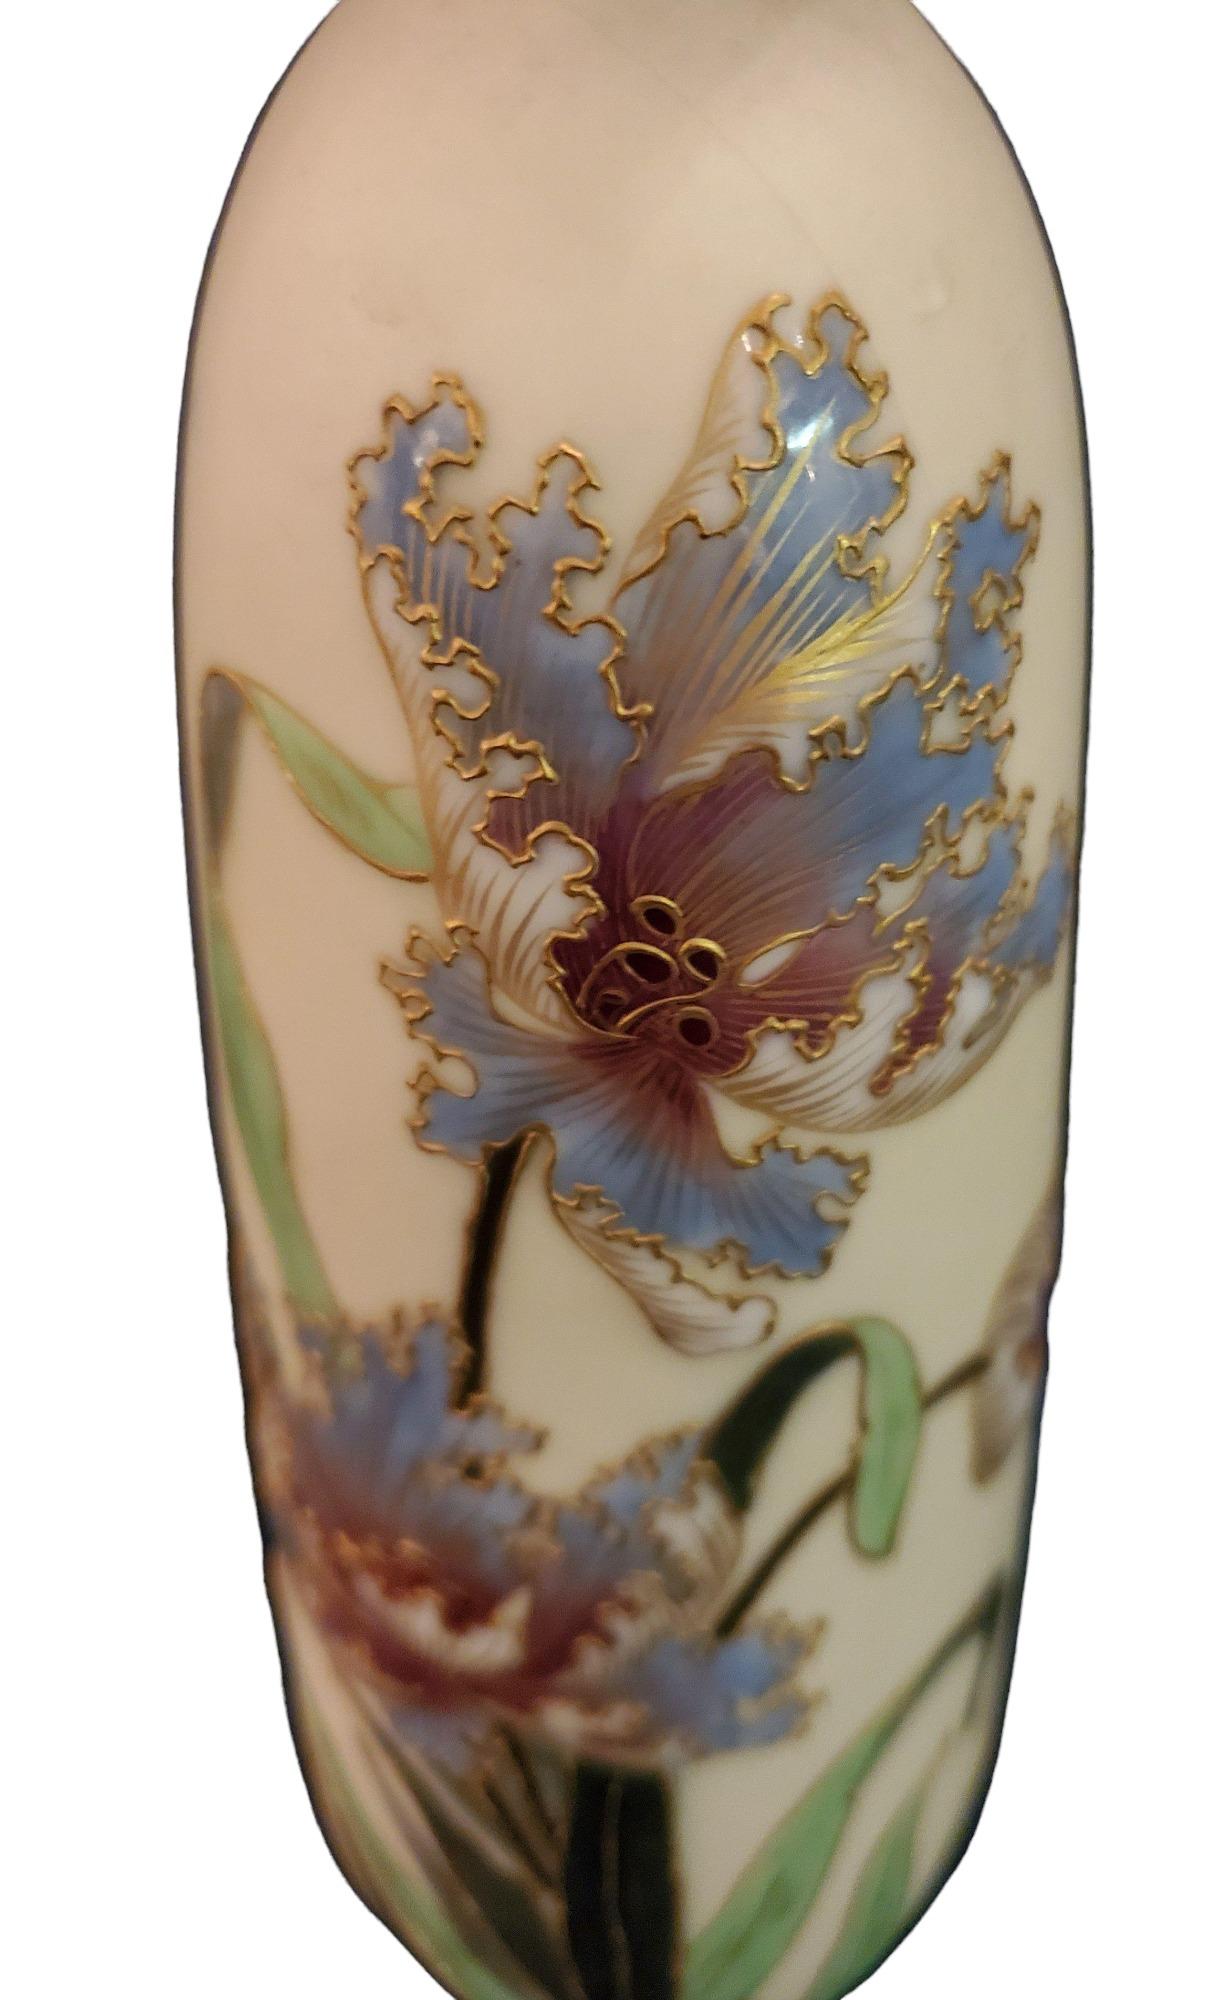 1940s German Porcelain Orchid vase. wonderful floral design with gold outline to the flowers and leaves. The rim has a gold paint drip.

An elegantly designed vase.